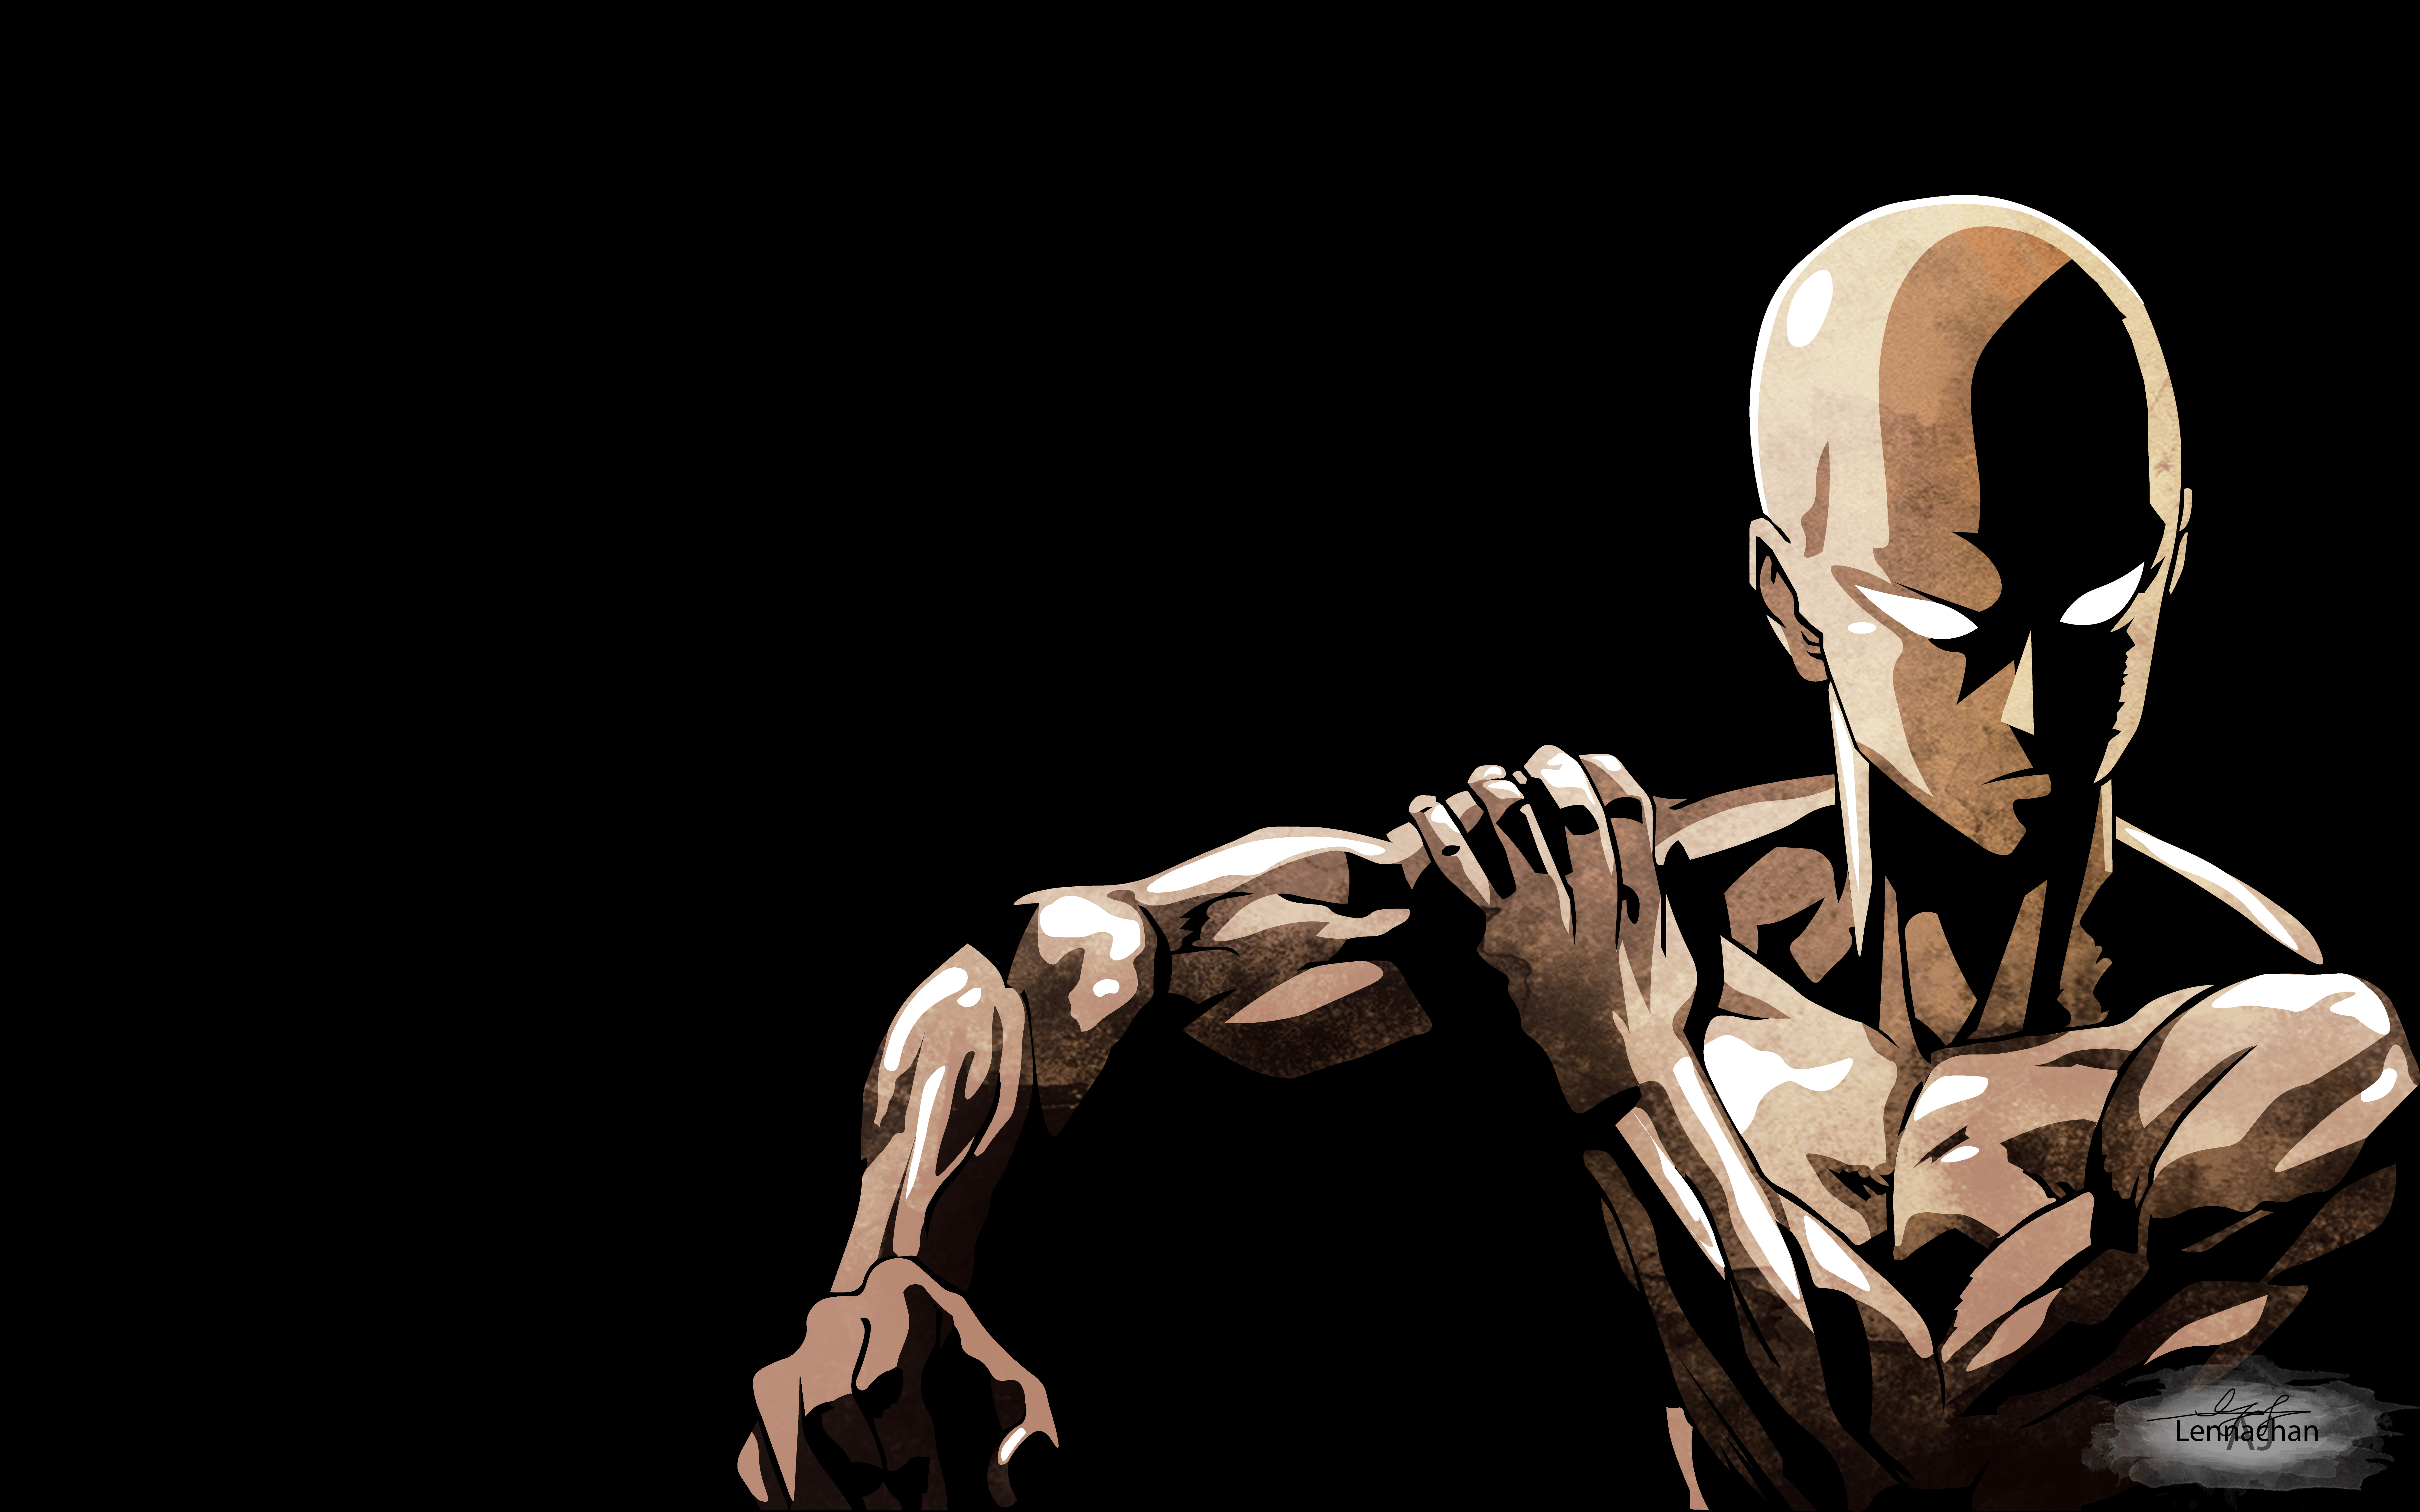 Fantastic One Punch Man Wallpaper. Daily Anime Art